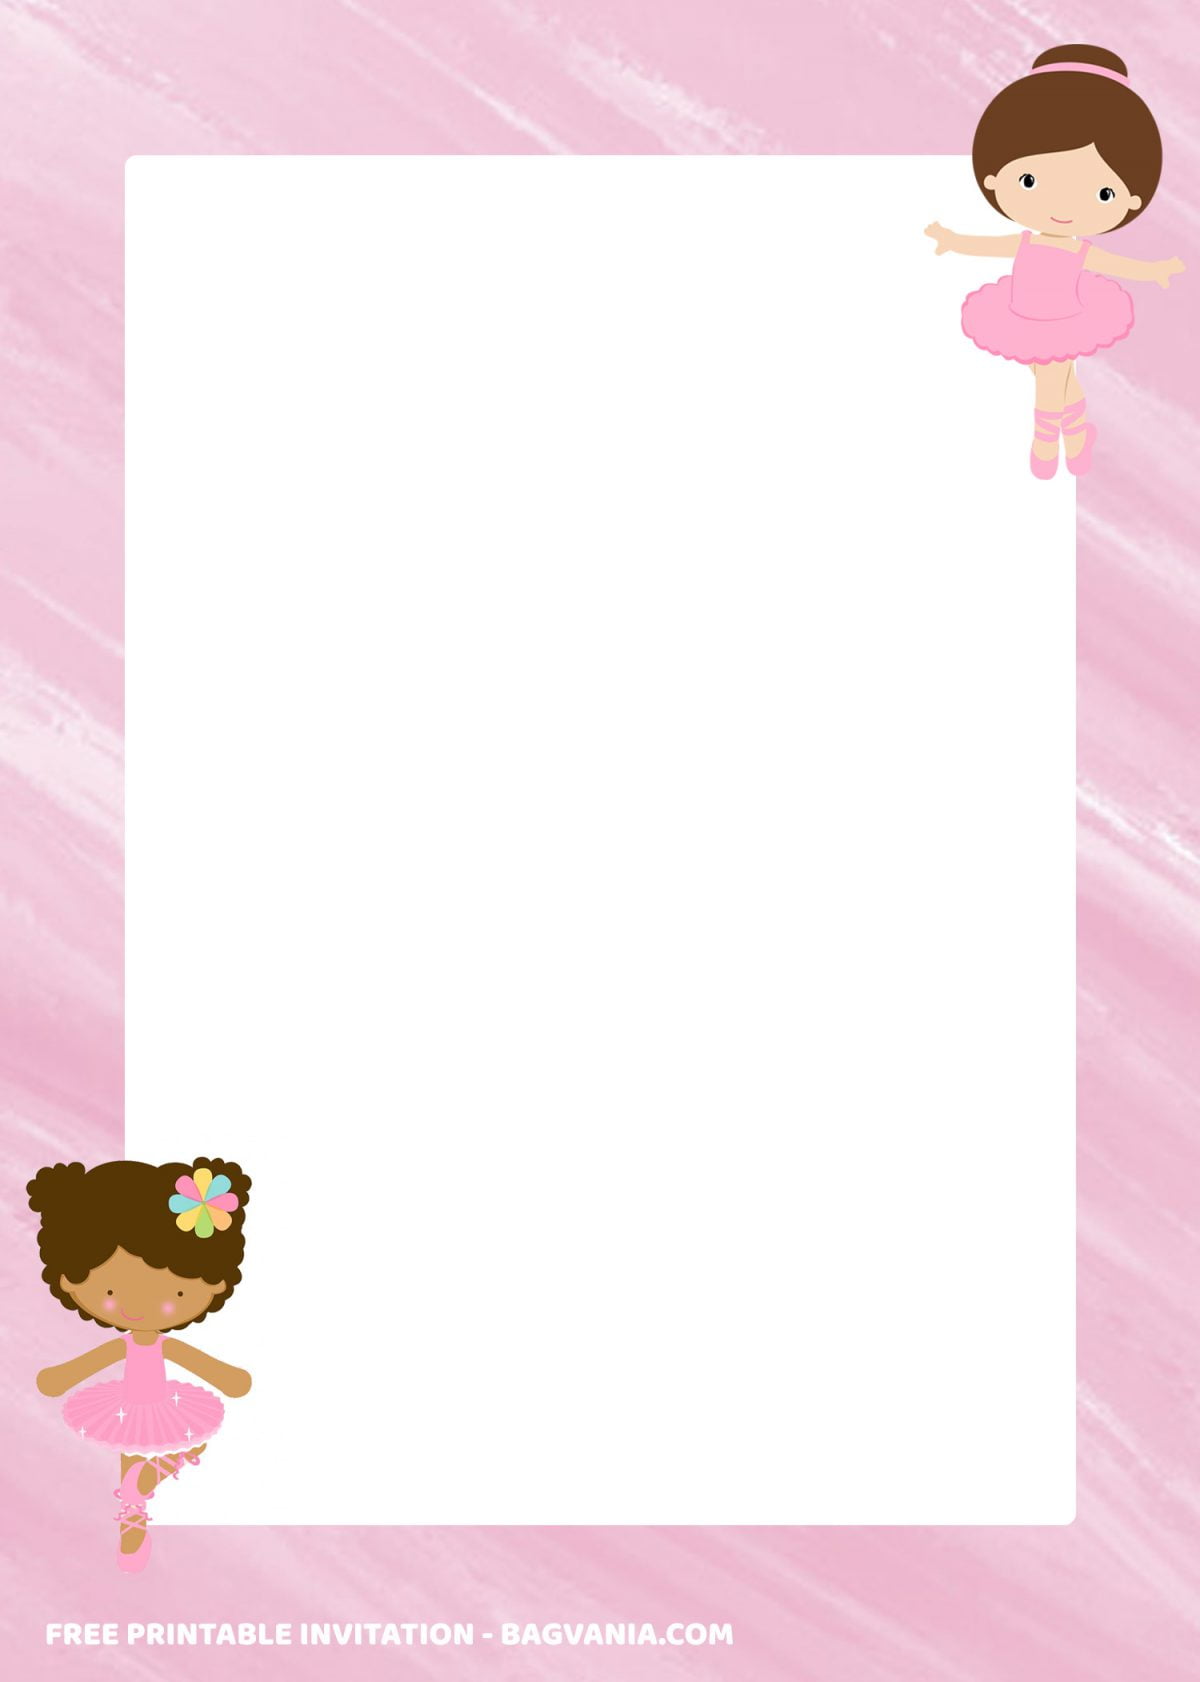 Free Printable Pink Ballerina Baby Shower Invitation Templates With Portrait Design and Cute Little Ballerina